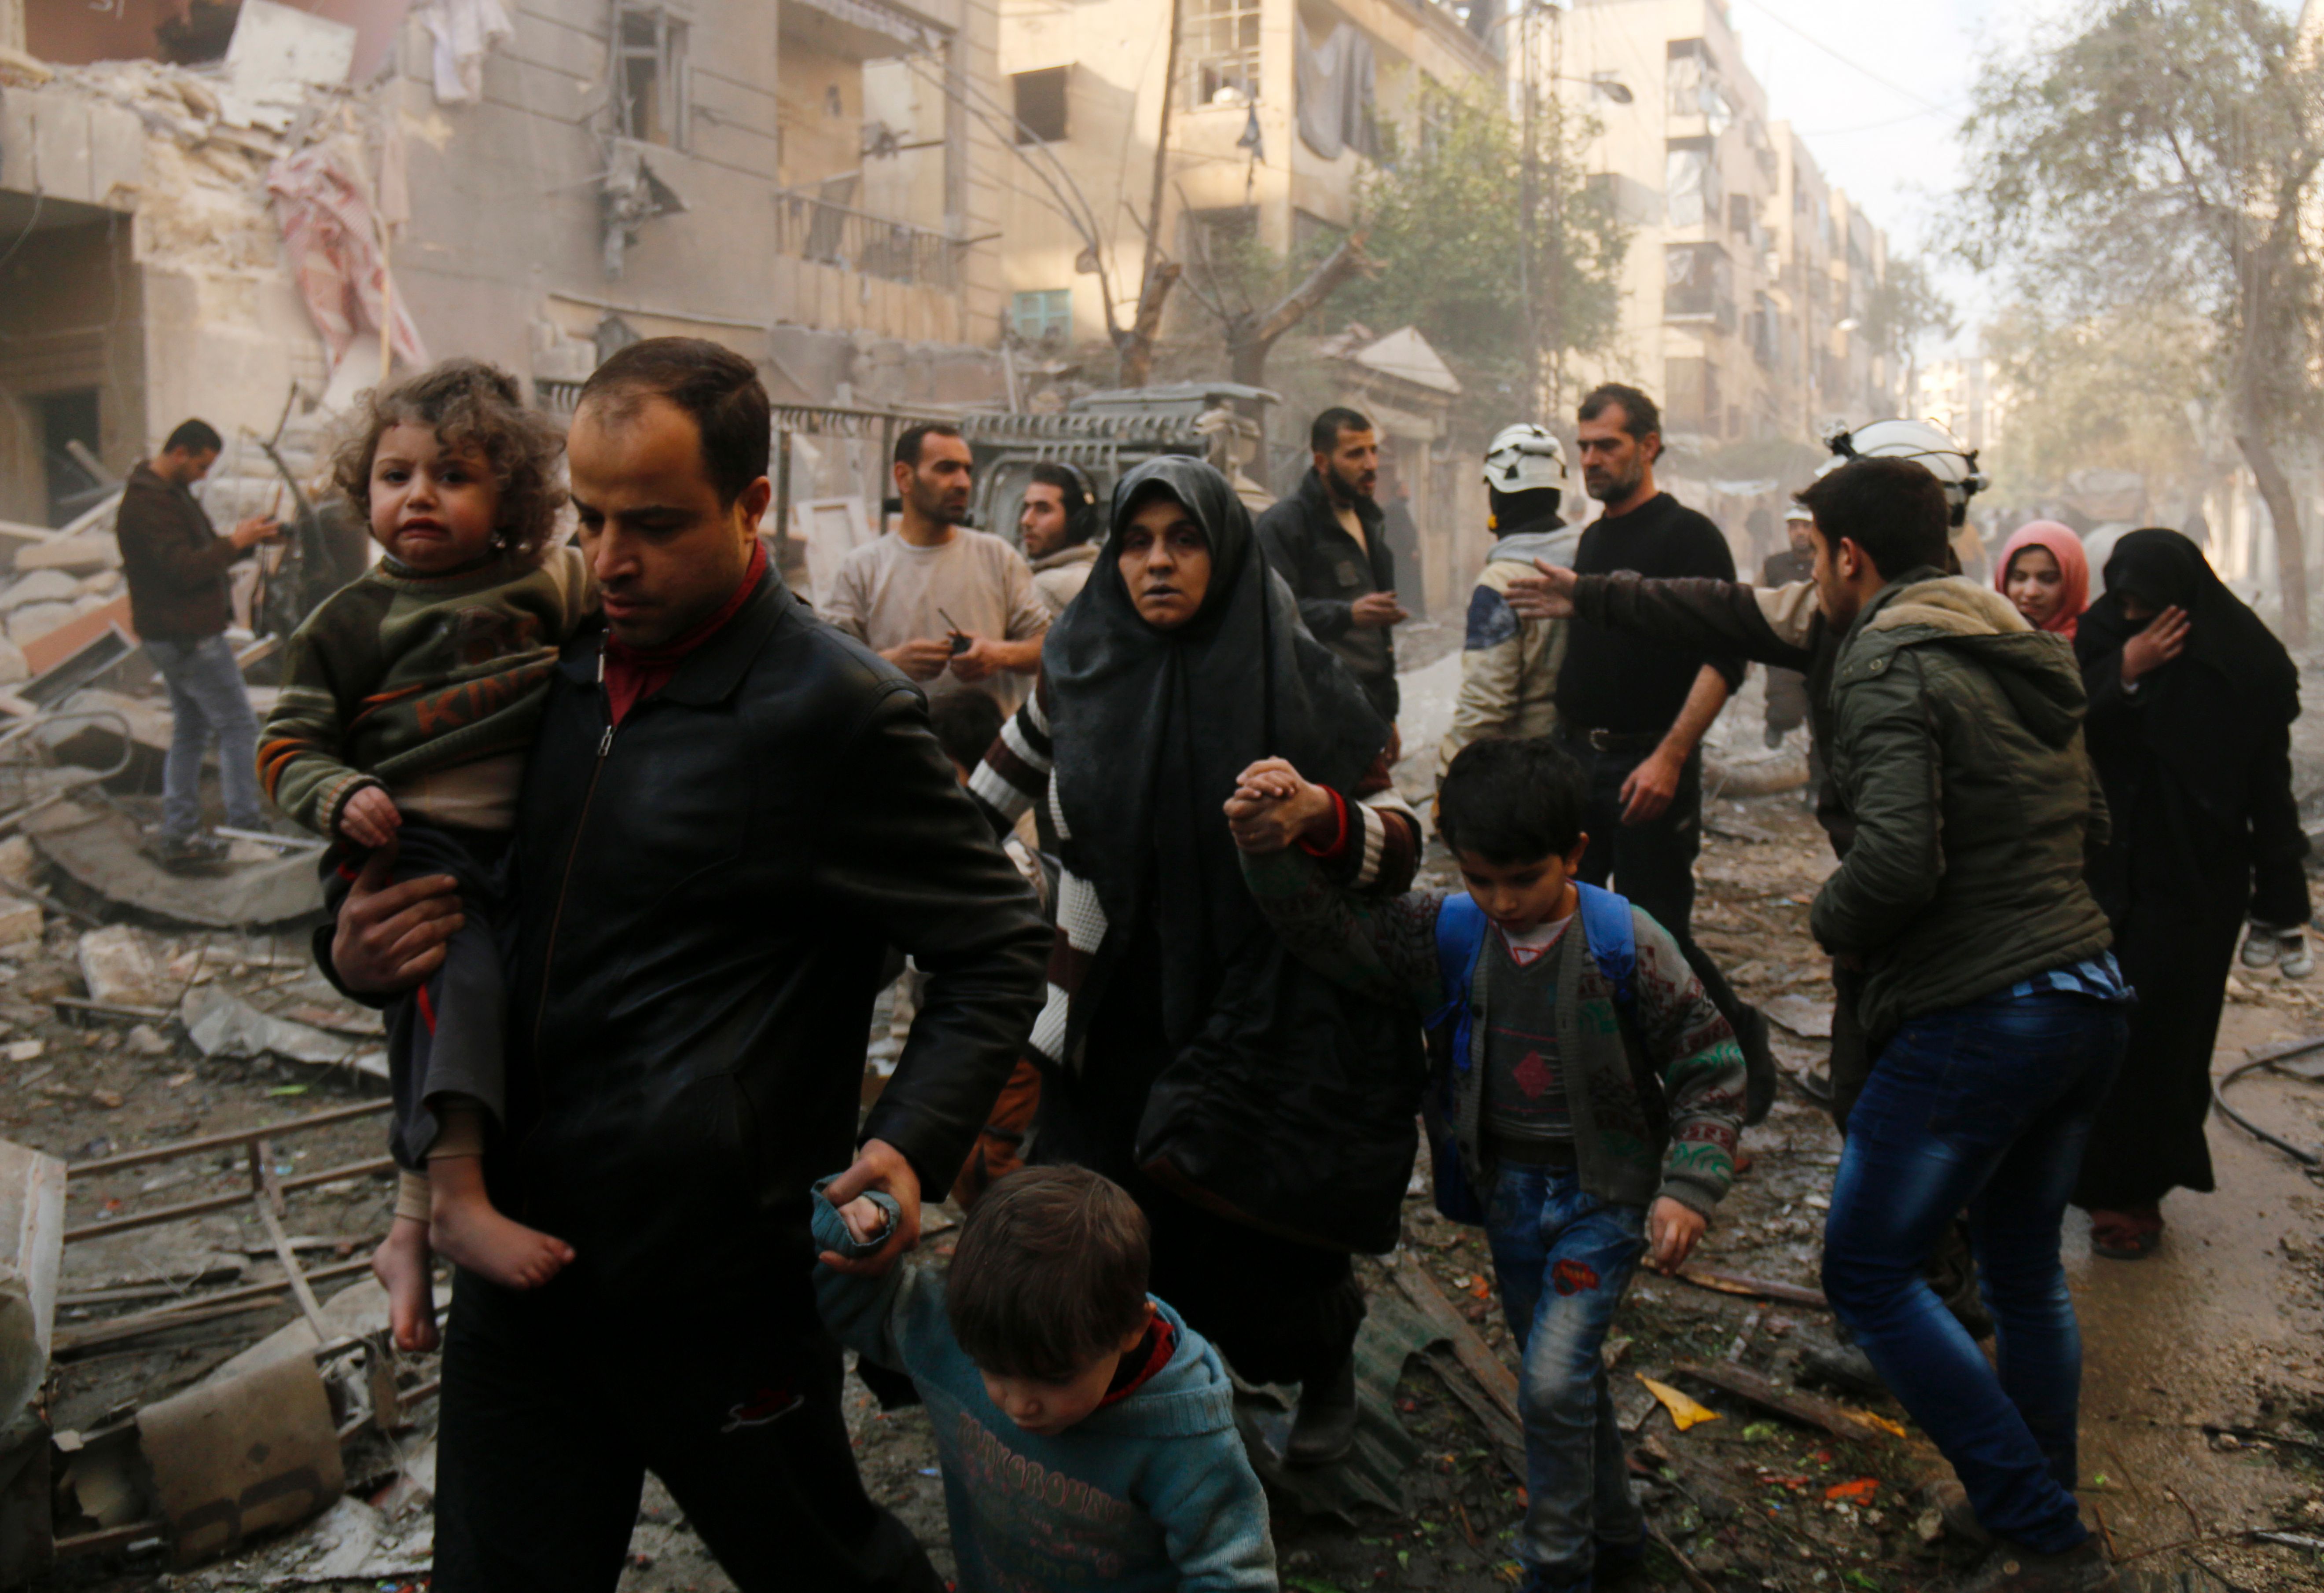 TOPSHOT - Syrians make their way through debris as they leave for a safer place following air strikes in the rebel-controlled side of the northern city of Aleppo on January 13, 2016. On January 12, 2016, suspected Russian strikes killed 57 civilians, including children and paramedics, in Idlib province, adjacent to Latakia, and in Aleppo, Syrian Observatory for Human Rights said. / AFP / KARAM AL-MASRI        (Photo credit should read KARAM AL-MASRI/AFP/Getty Images)